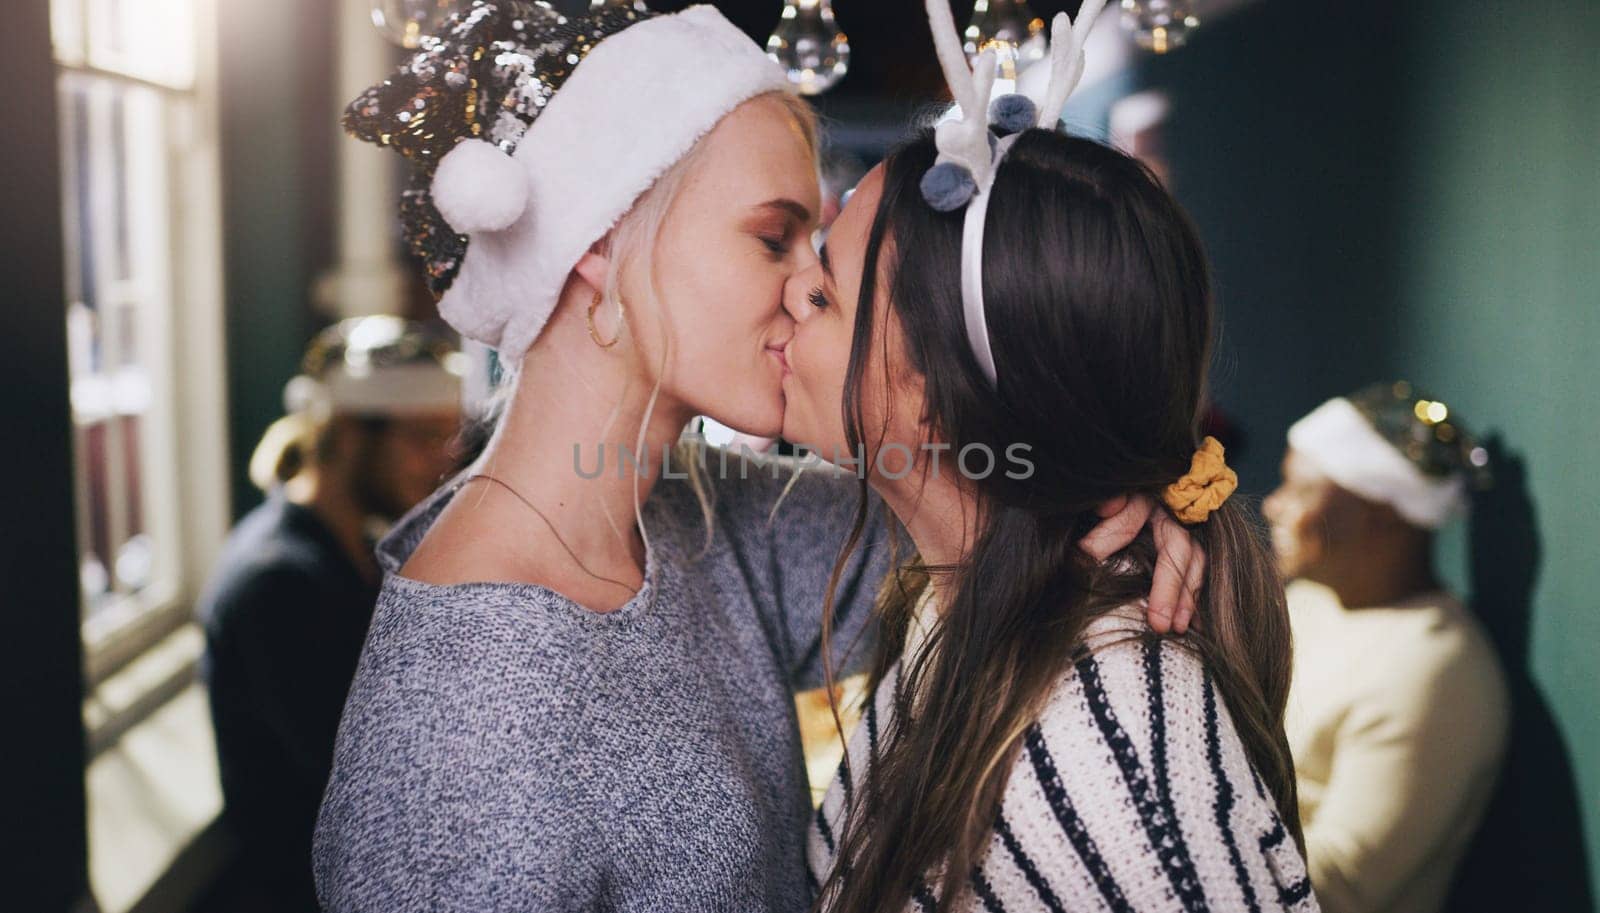 Christmas, kiss and love with lesbian couple at party for celebration, festive and holiday. Lgbtq, gay and dance with women partners at xmas event for romance, social and relax at reunion gathering by YuriArcurs